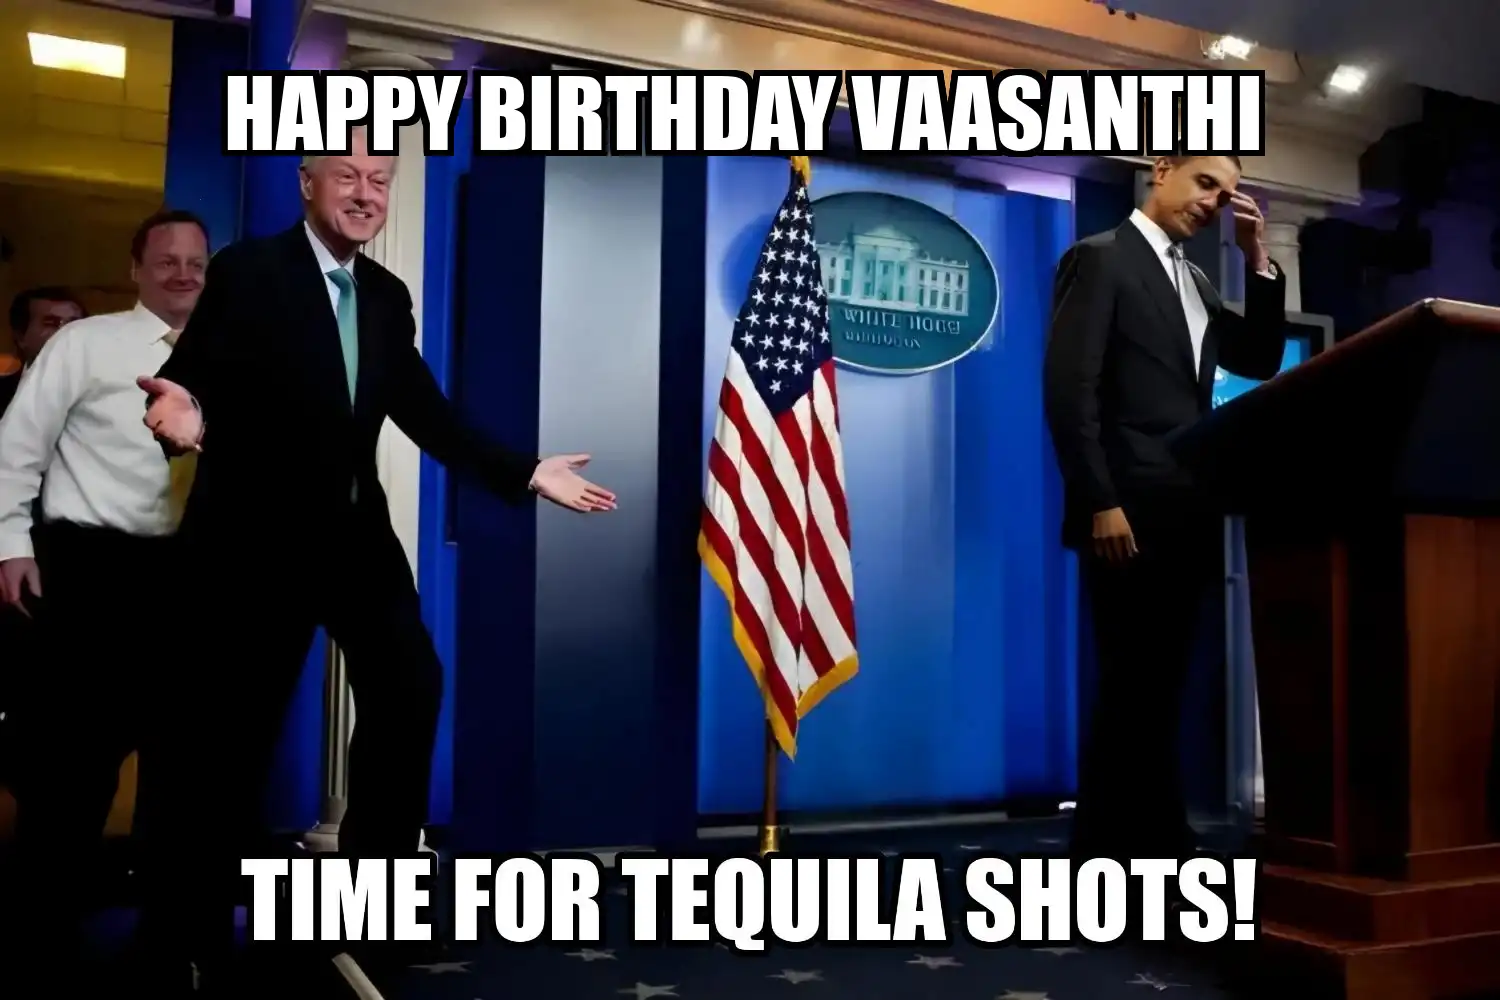 Happy Birthday Vaasanthi Time For Tequila Shots Memes